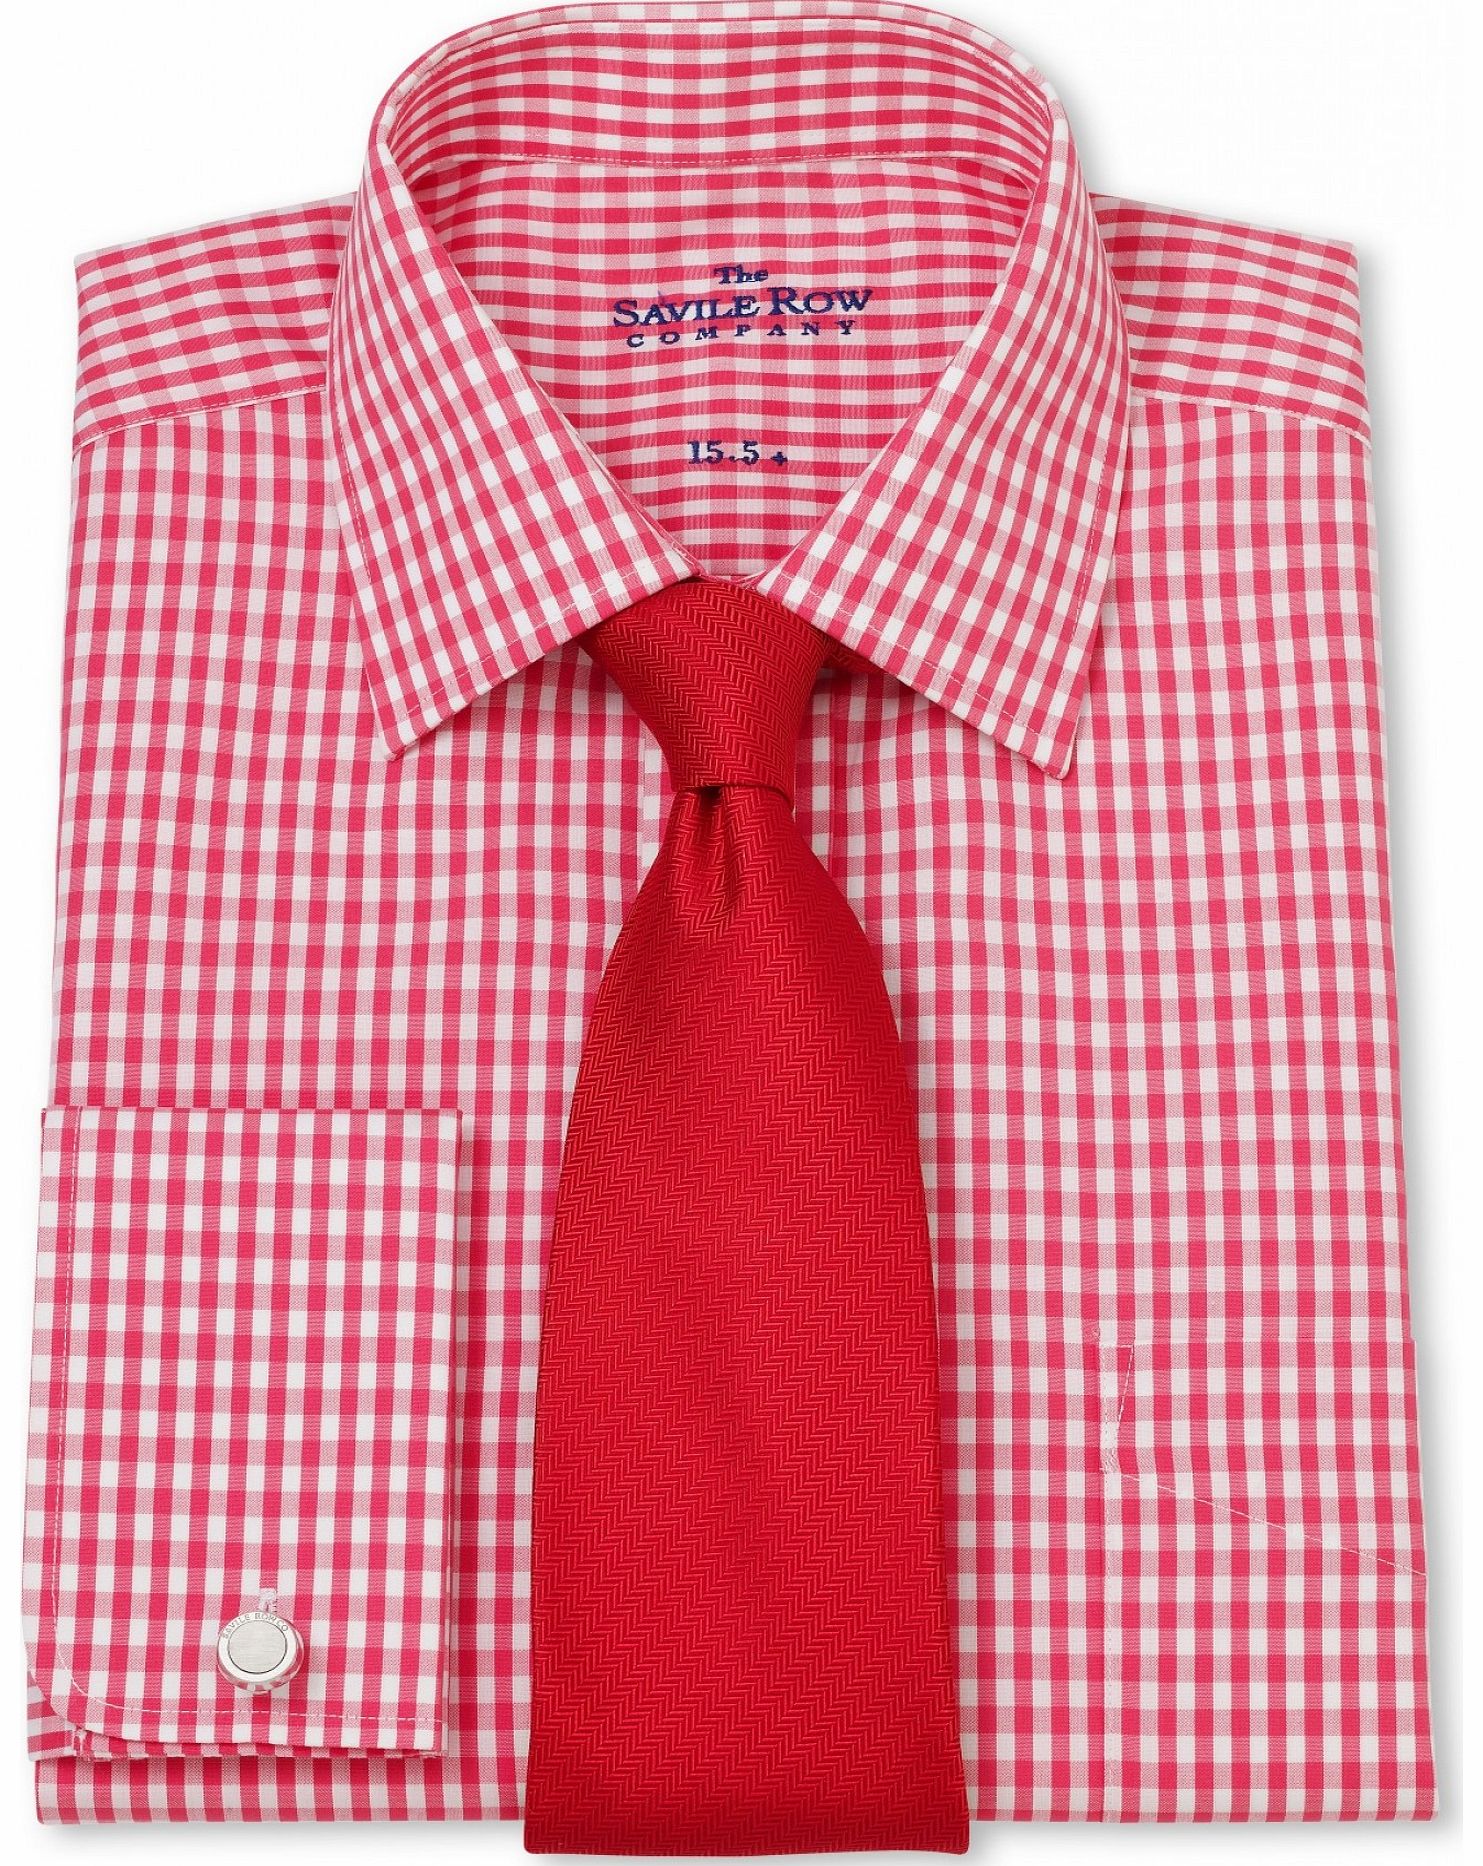 Savile Row Company Pink White Gingham Check Classic Fit Shirt 17